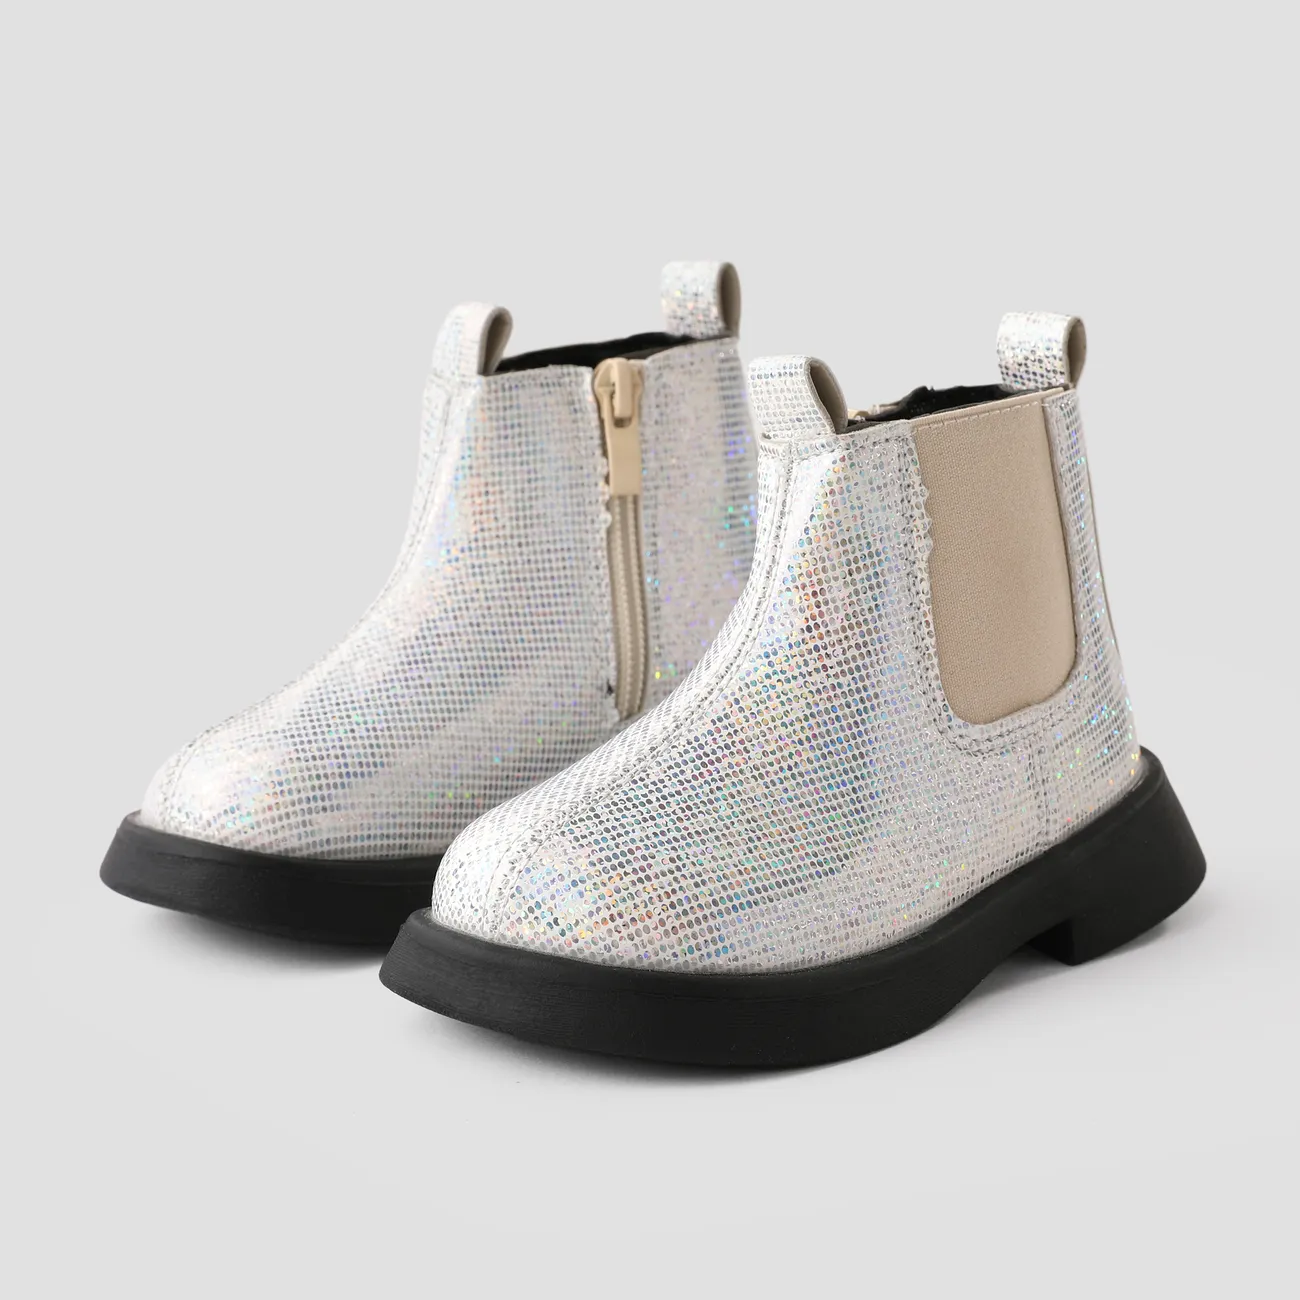   Toddlers and Kids Cool Glitter Design Side Zipper Leather Boots Silver big image 1